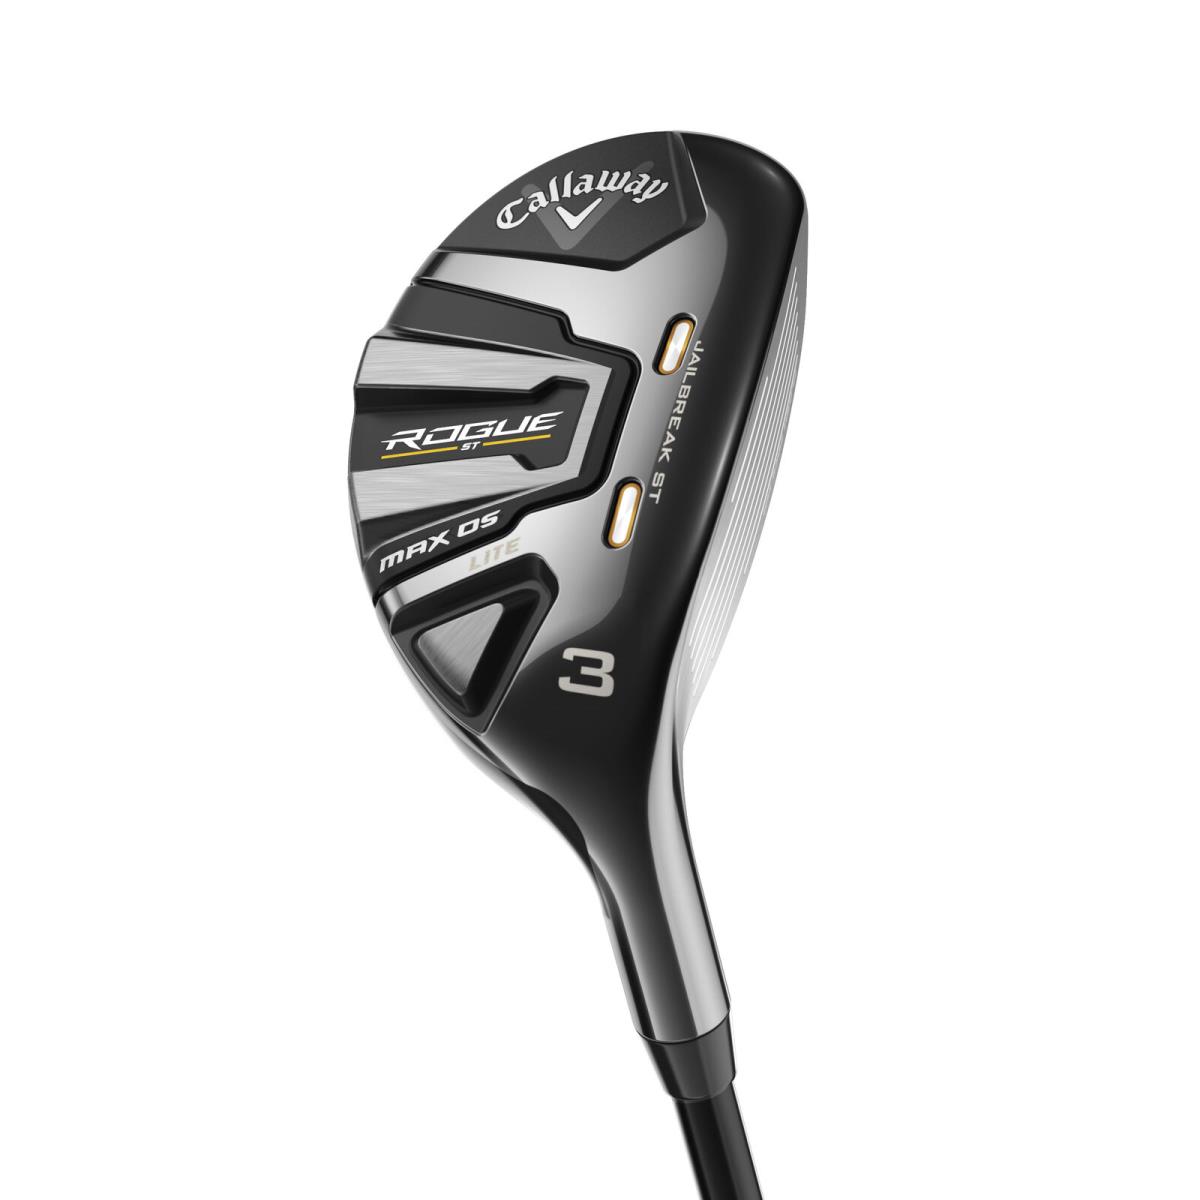 Callaway Rogue ST Max OS Lite Options Available